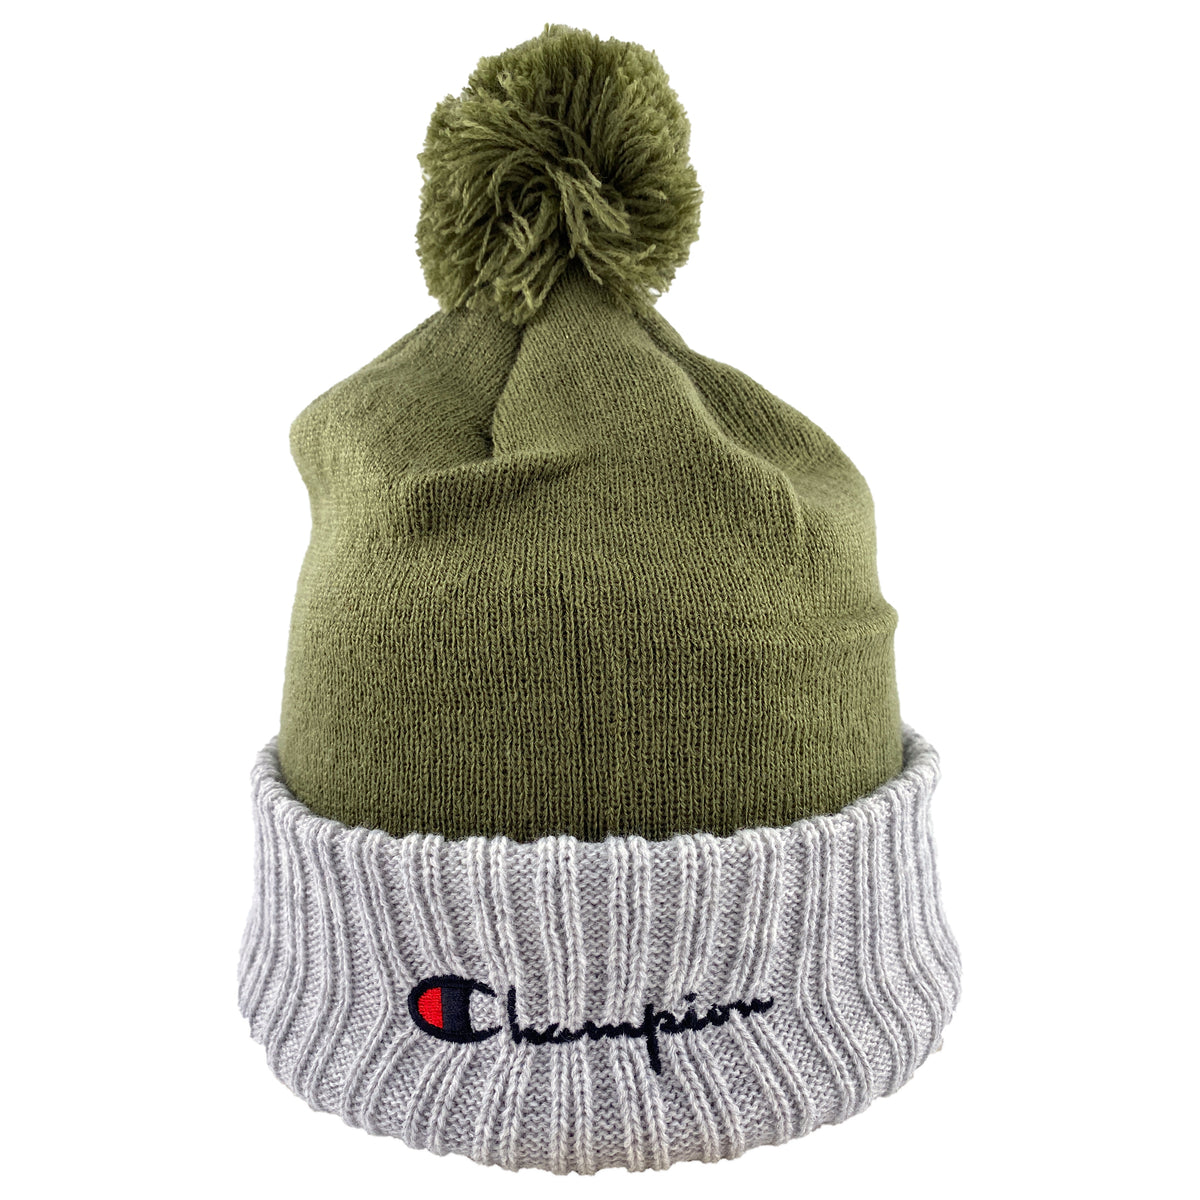 Champion Men's Beanie with Pom – That Shoe Store and More